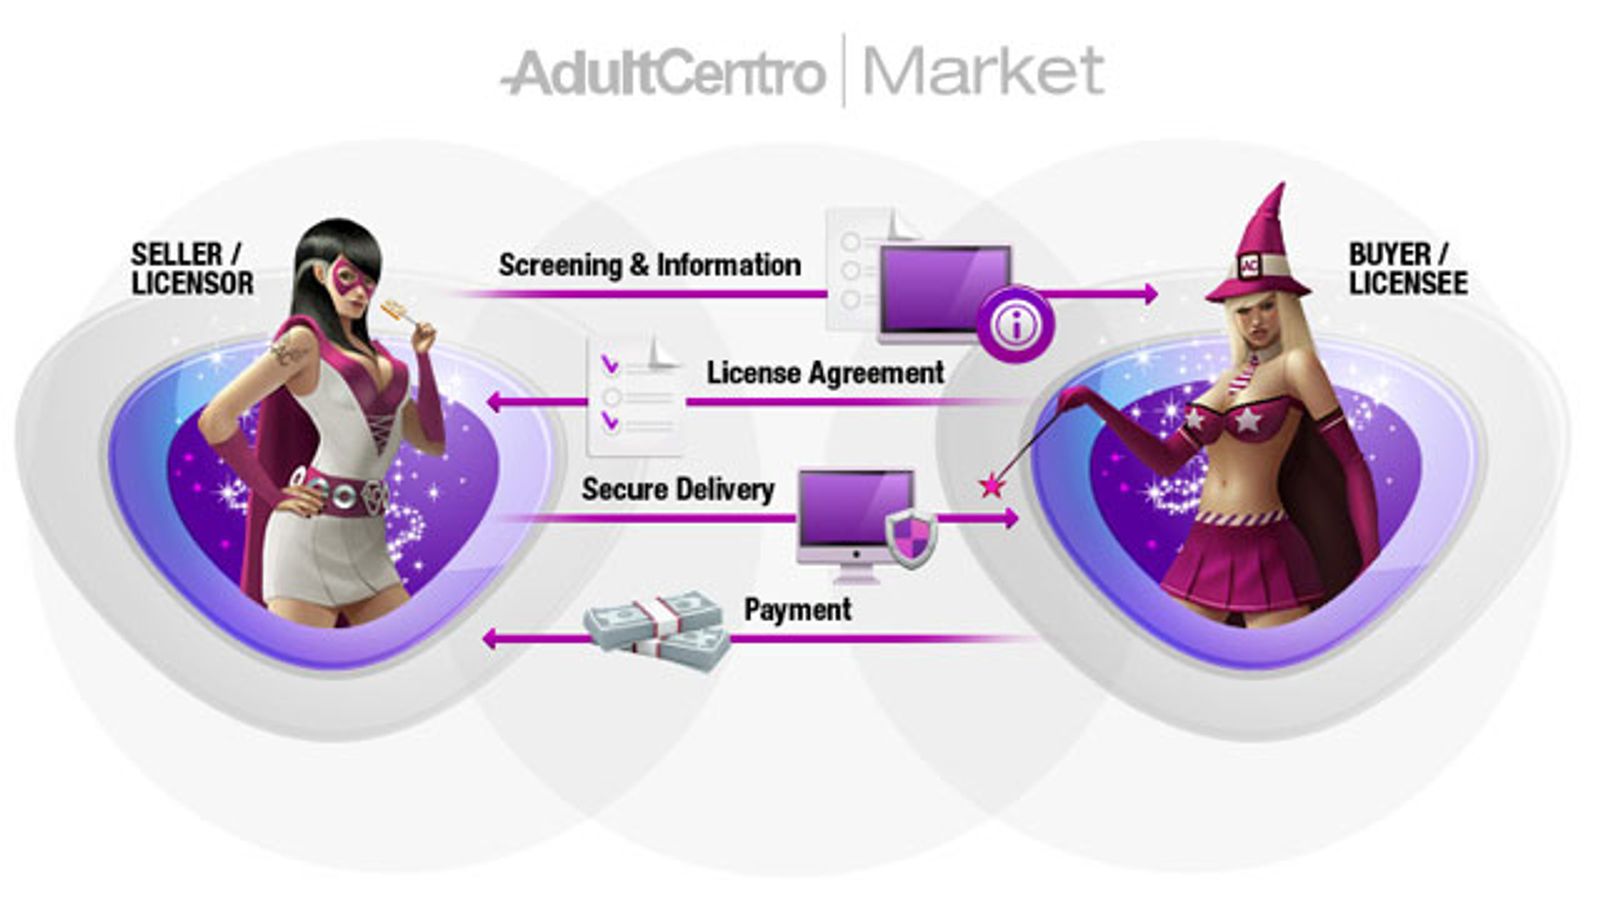 AdultCentro Market to Debut at Mainstream Media Conference